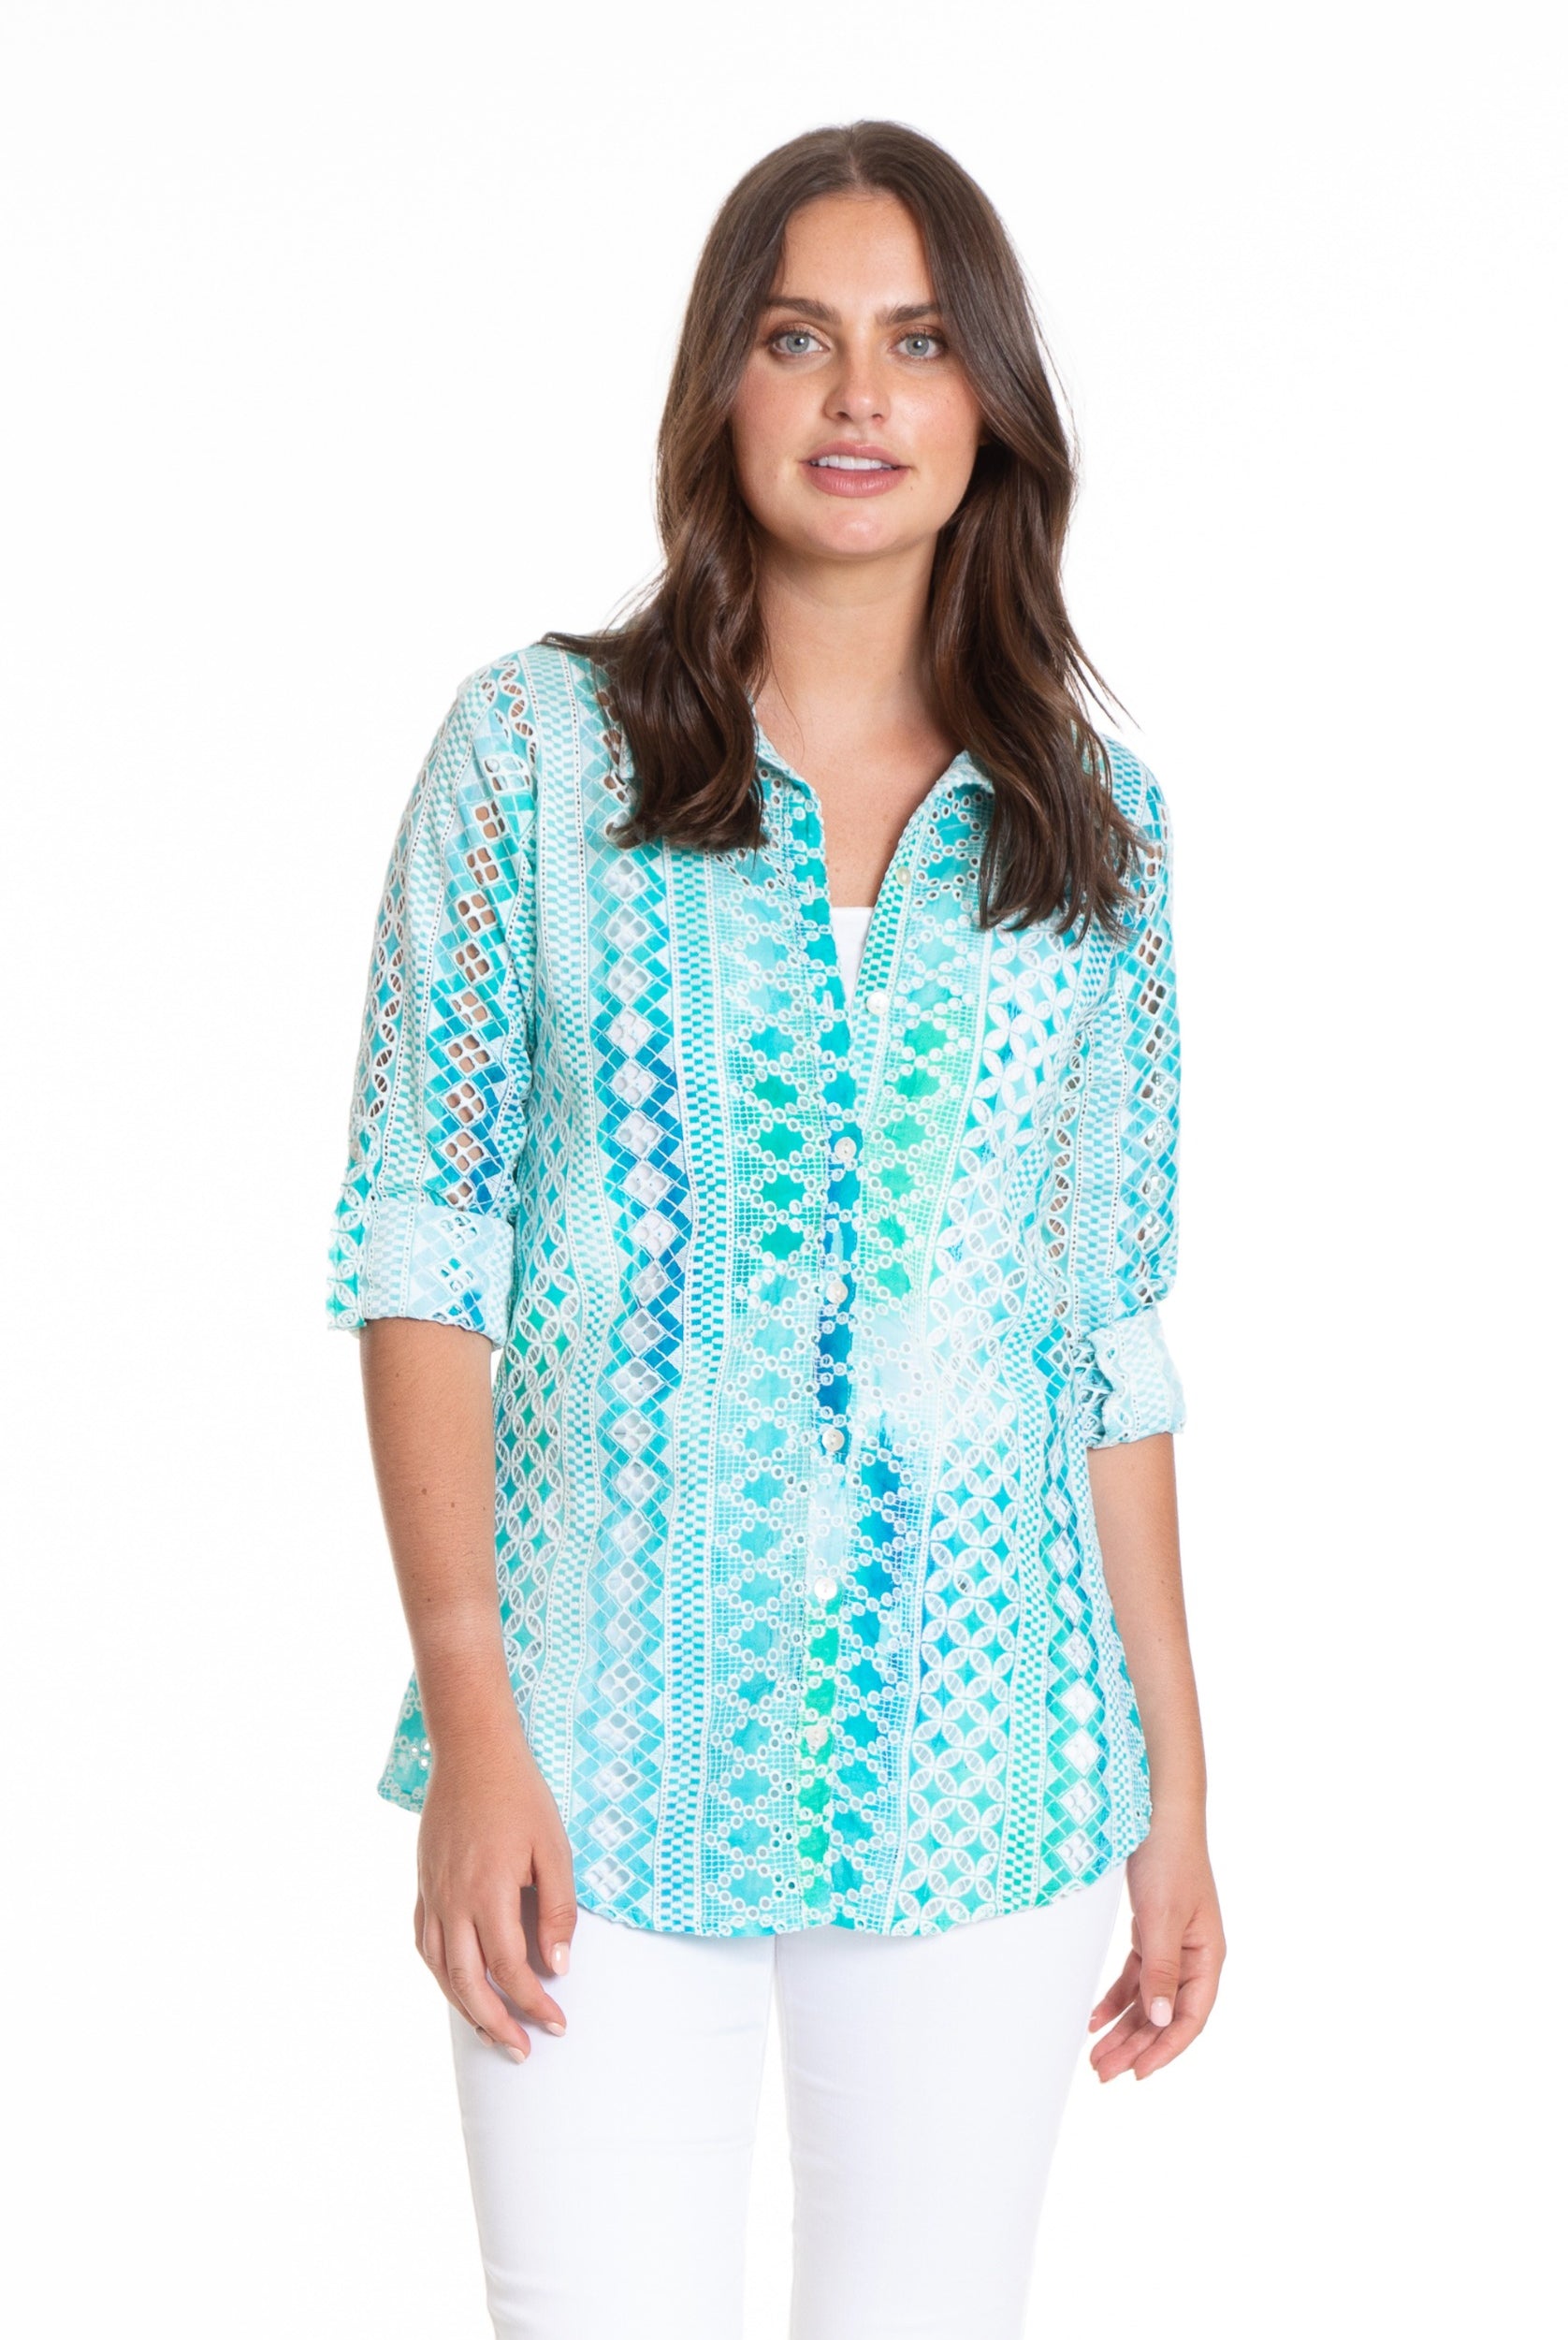 Blue Lagoon Stripe Print Button-up with Roll-up Sleeve